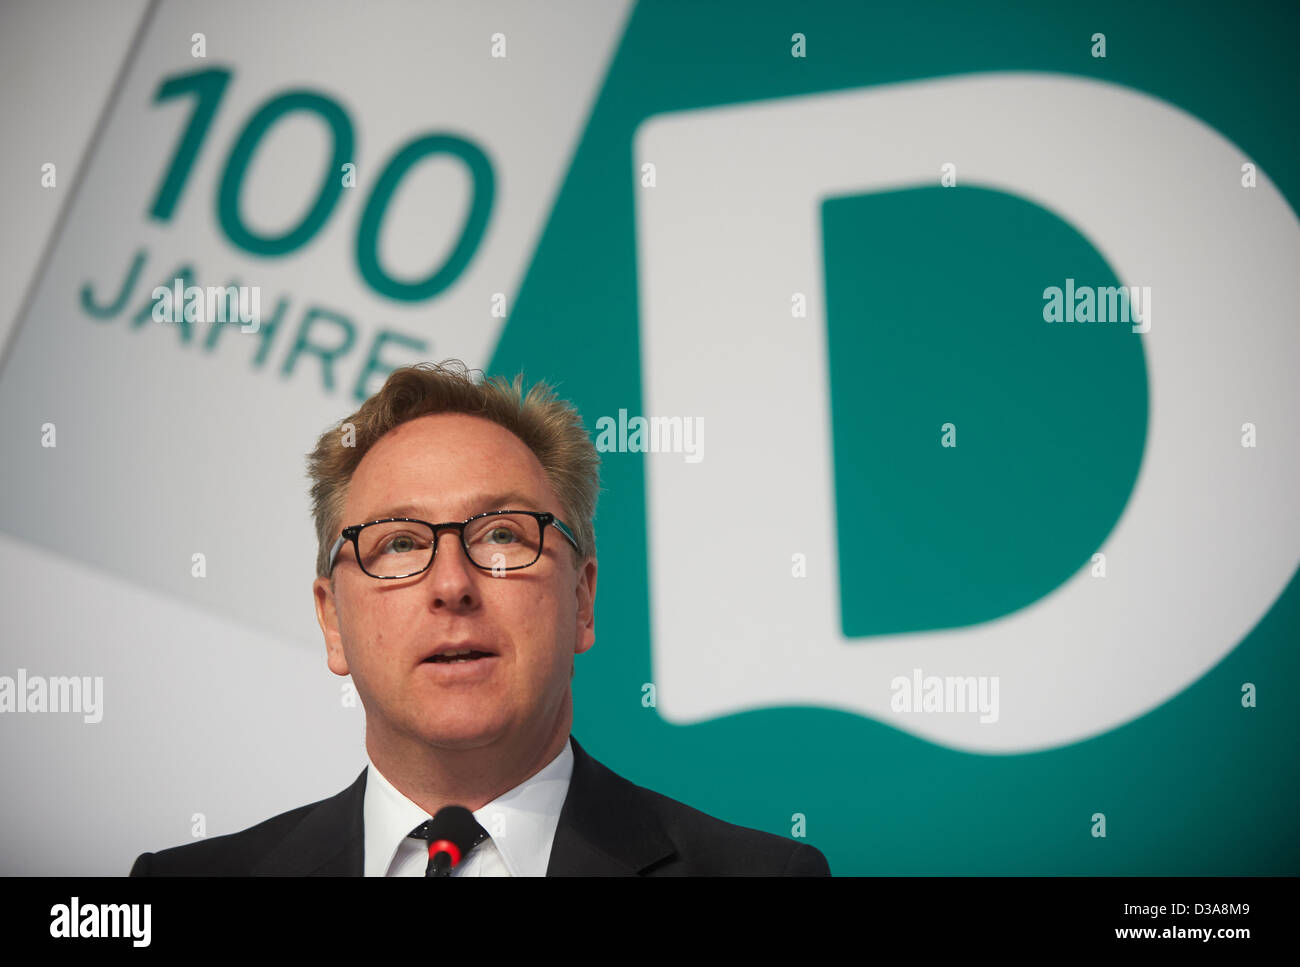 Chairman of the Administrative Board at Deichmann SE, CEO Heinrich Deichmann,  speaks during a press conference on the 100th anniversary of the shoe  fashion chain in Esssen, Germany, 14 February 2013. Photo: